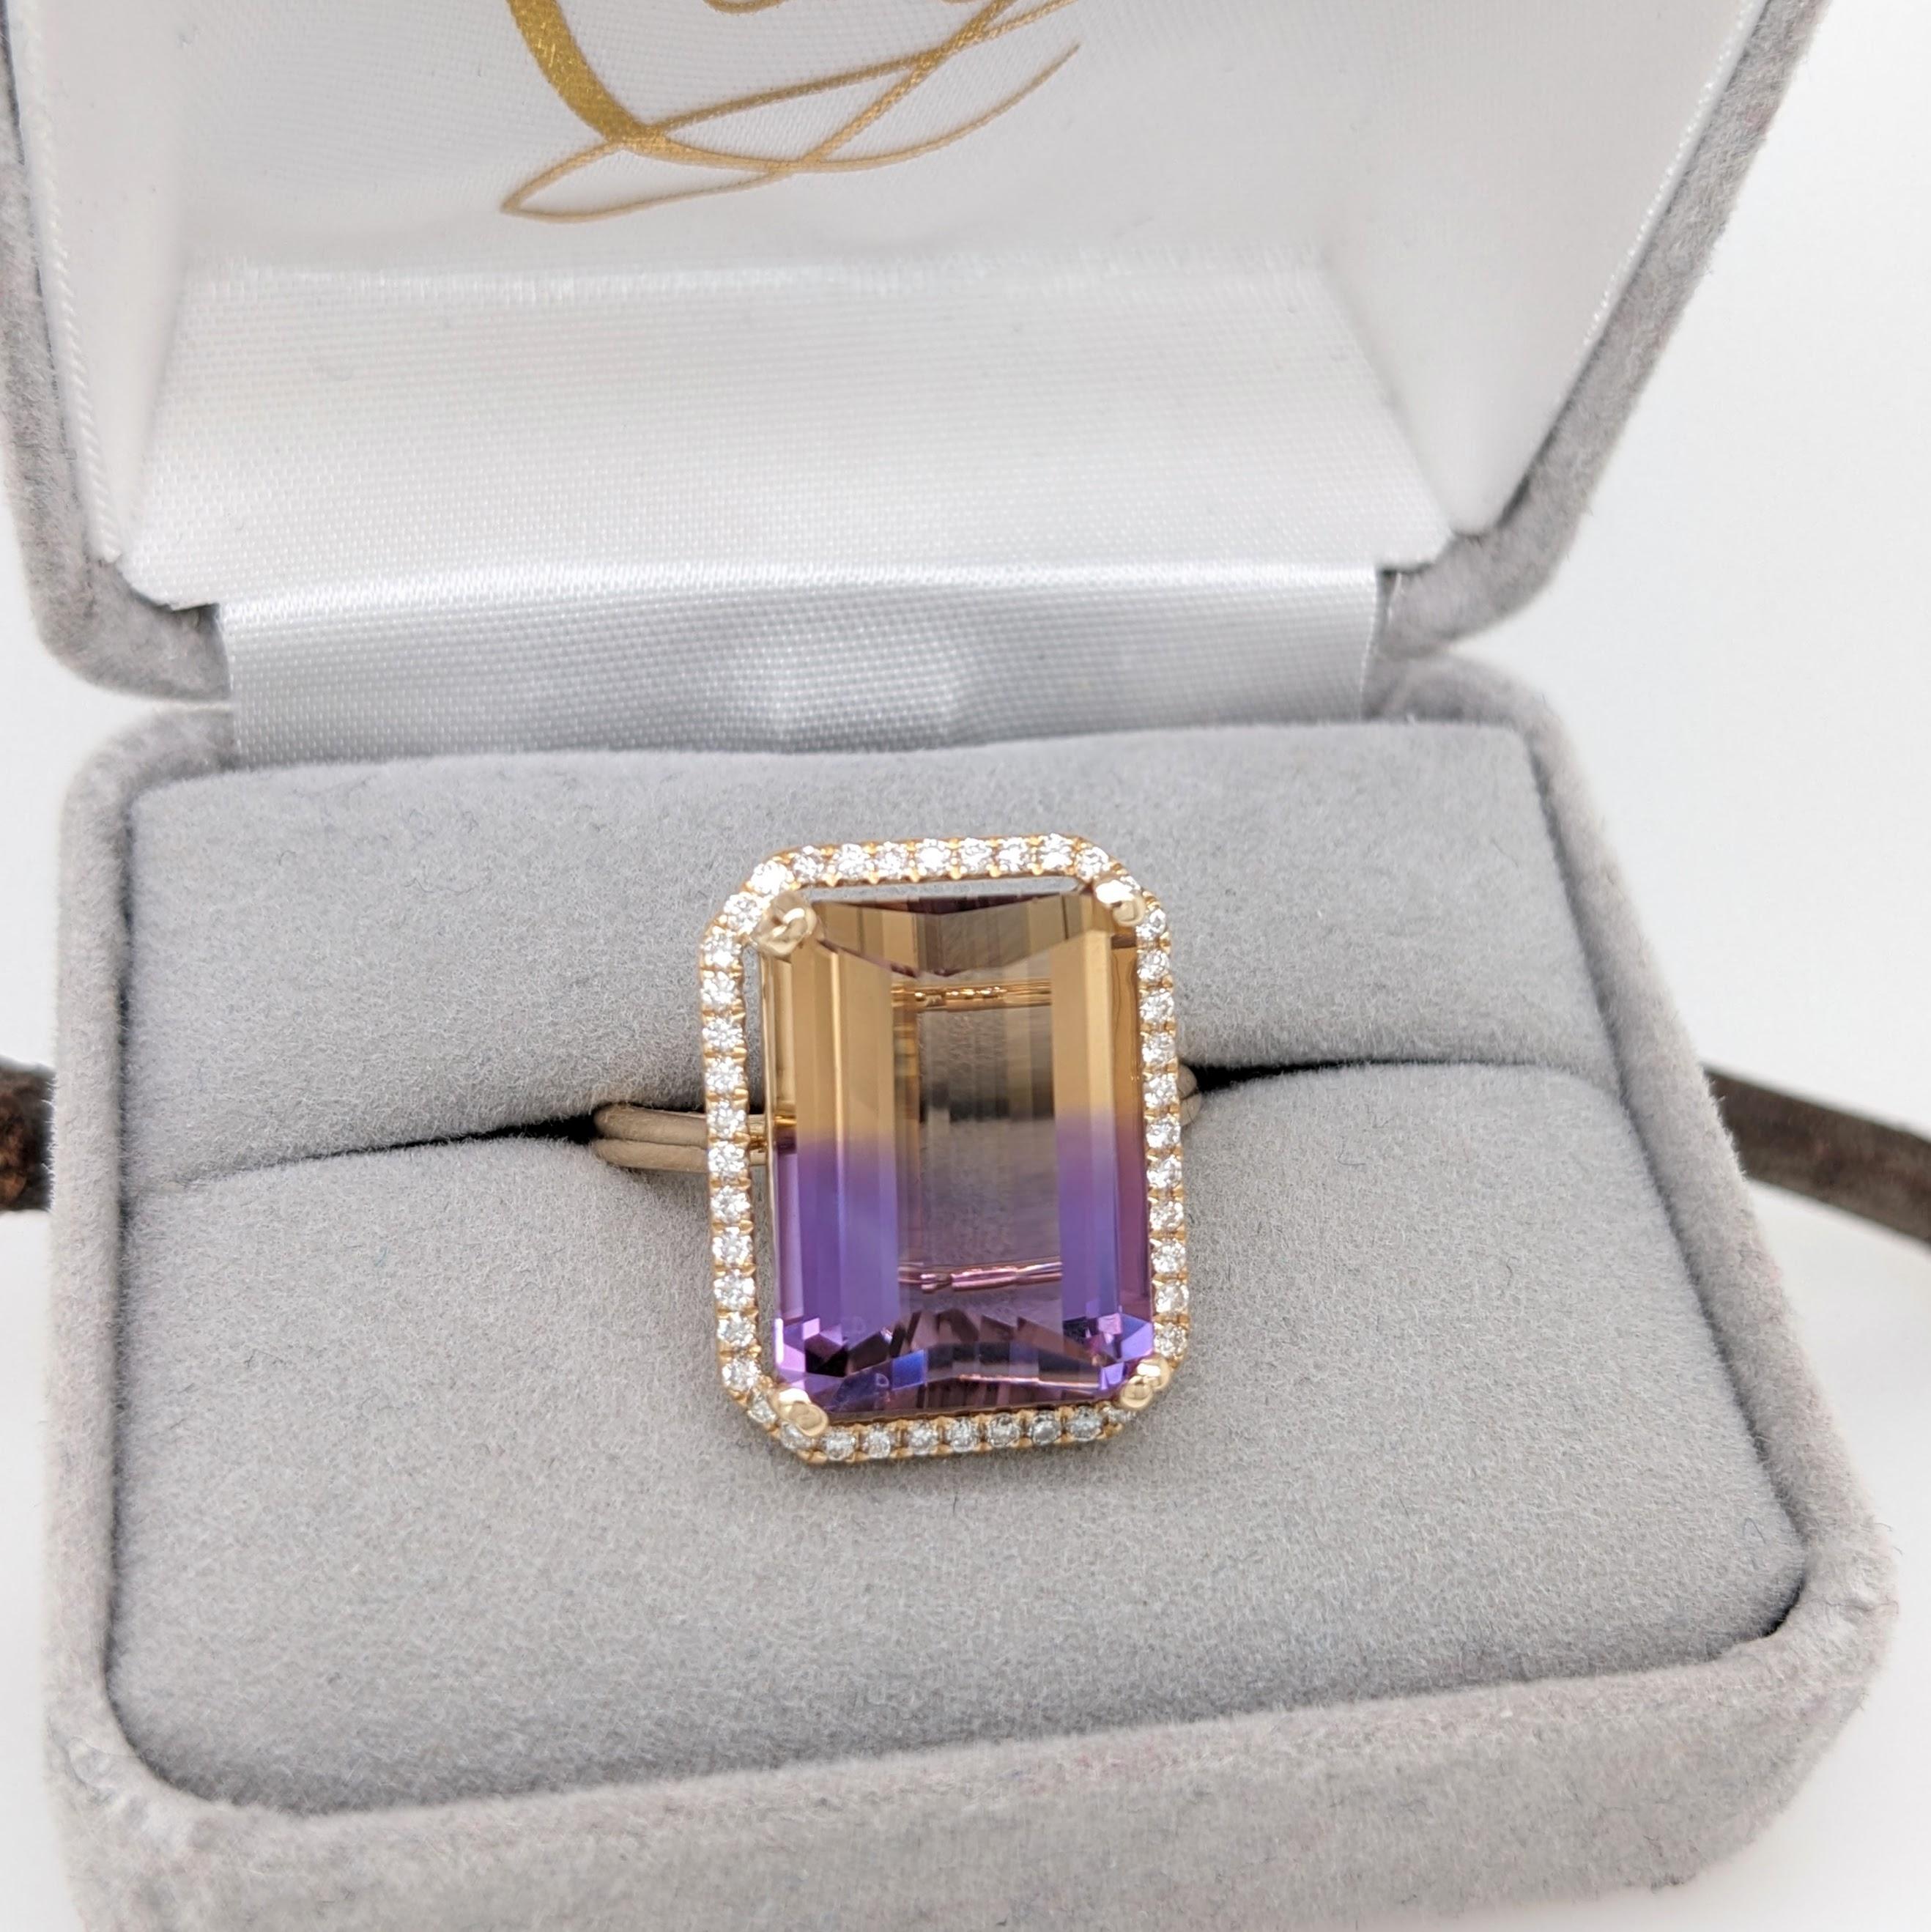 Women's 9.7 carat Ametrine Ring w All Natural Diamond Halo in Solid 14k Yellow Gold